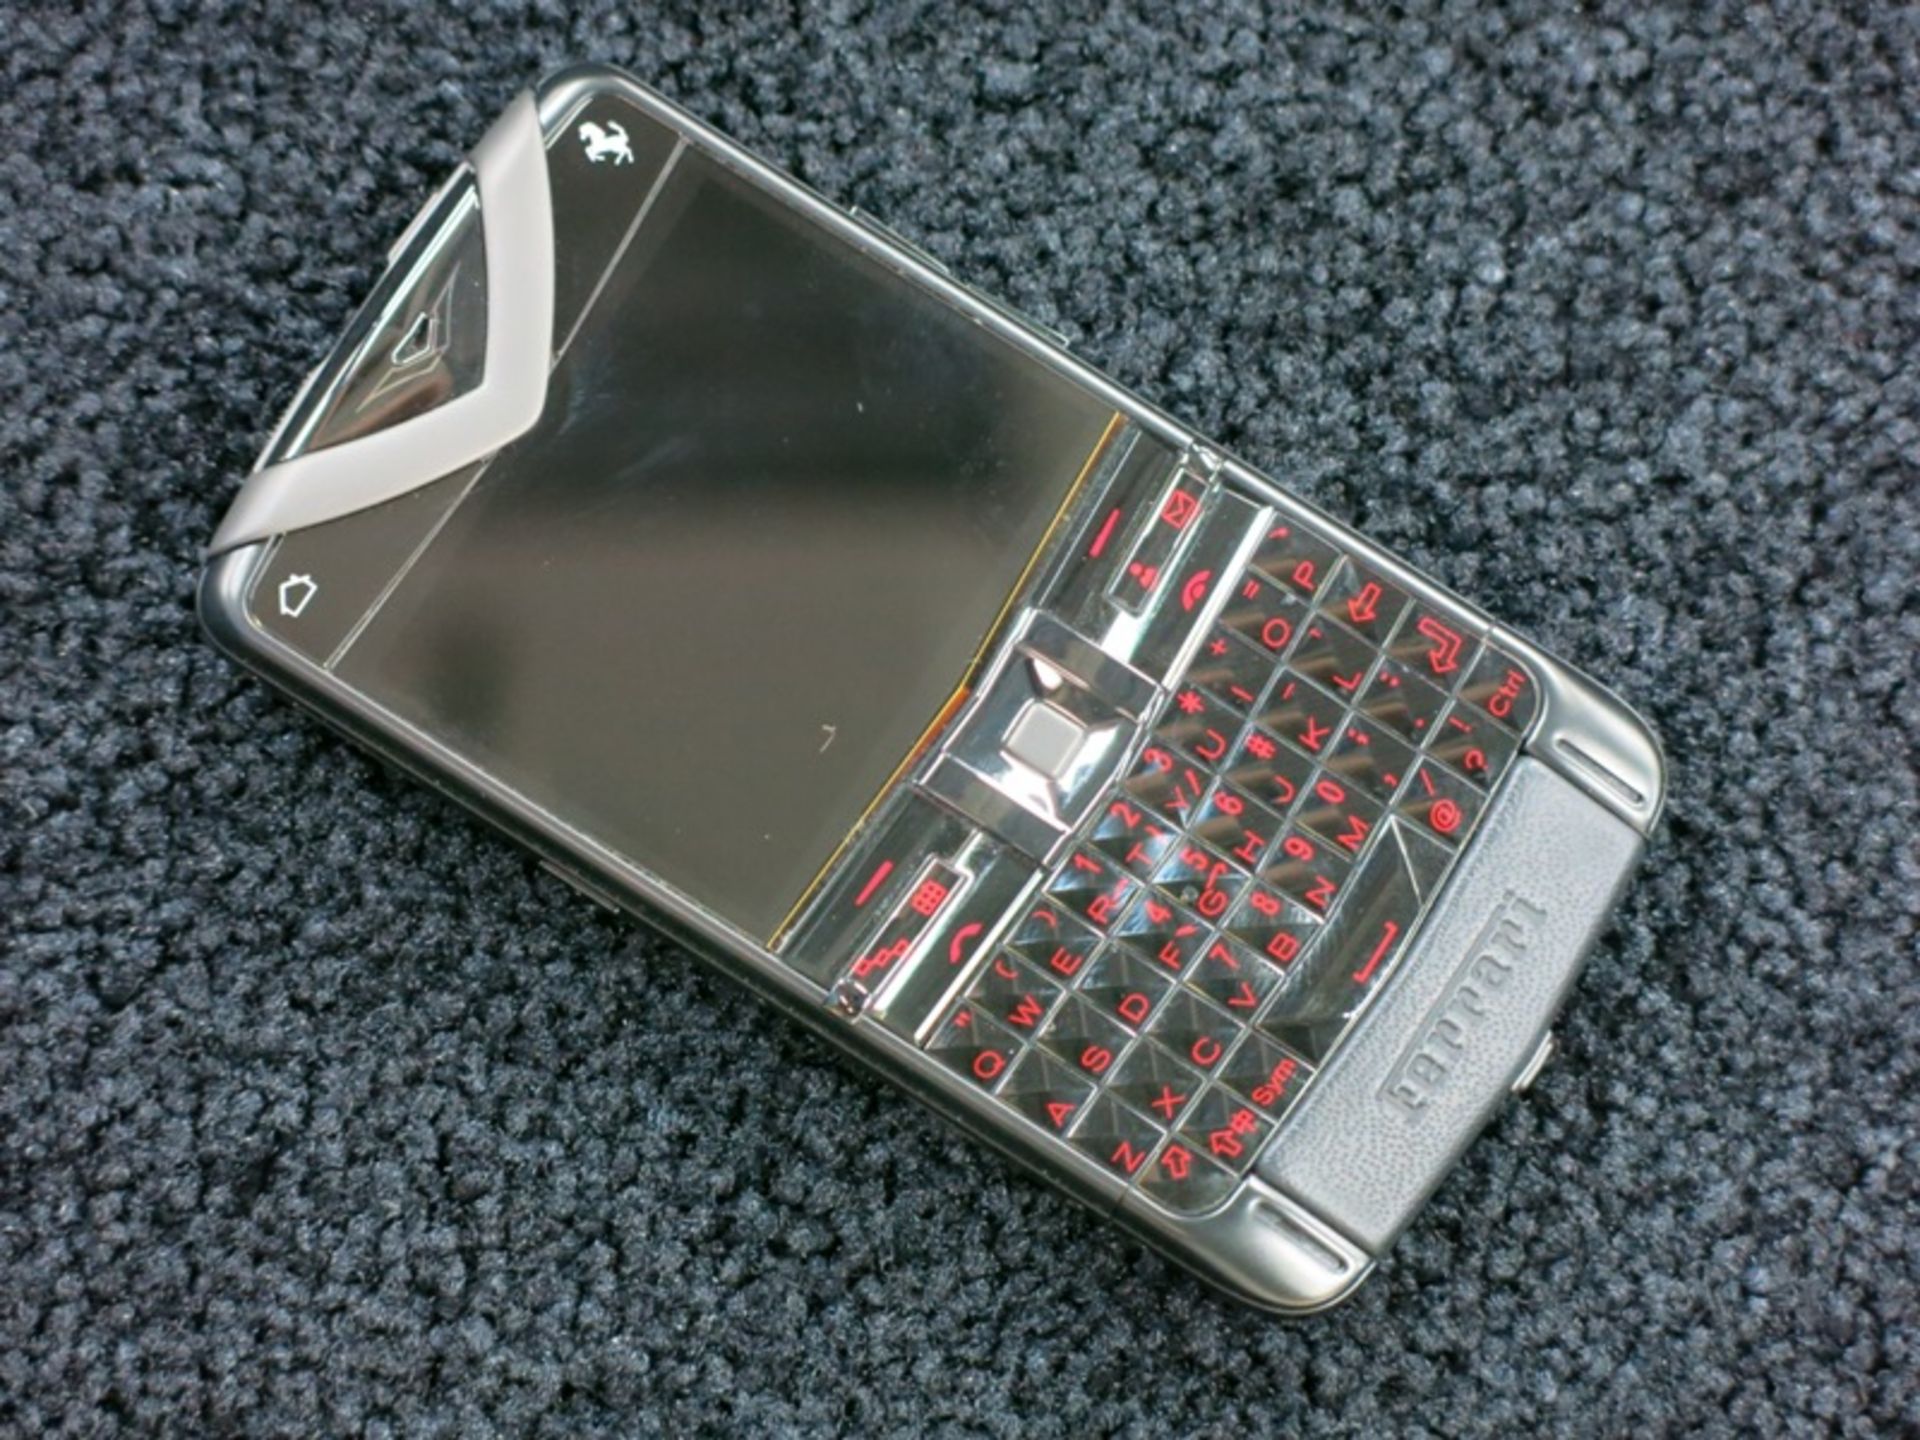 Vertu Ferrari Quest Edition Phone in Black Ceramic with Sapphire Keys. Comes with Full Sales Pack (